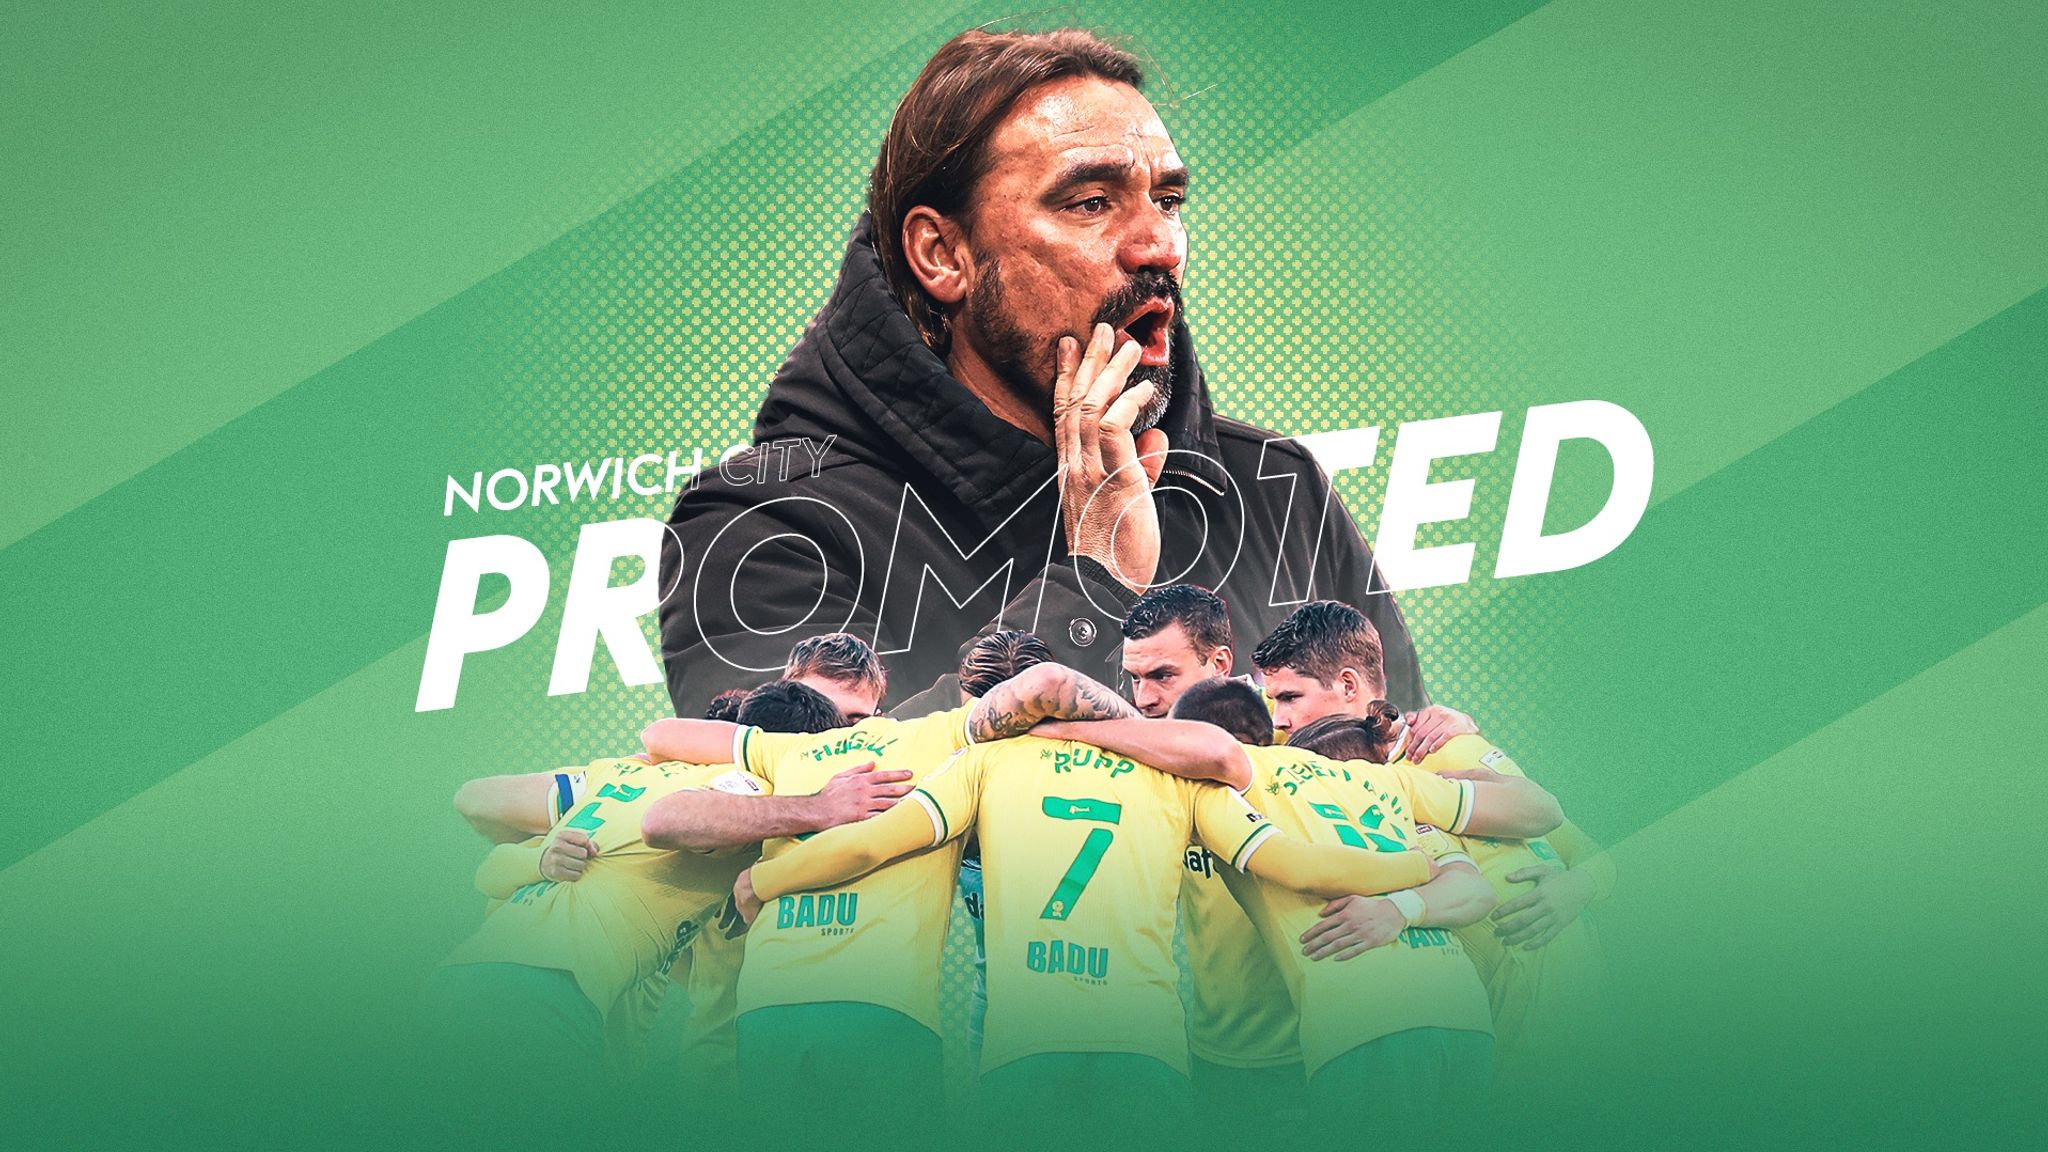 Ncfc Schedule 2022 Norwich City Promoted To Premier League As Swansea And Brentford Fail To  Win | Football News | Sky Sports